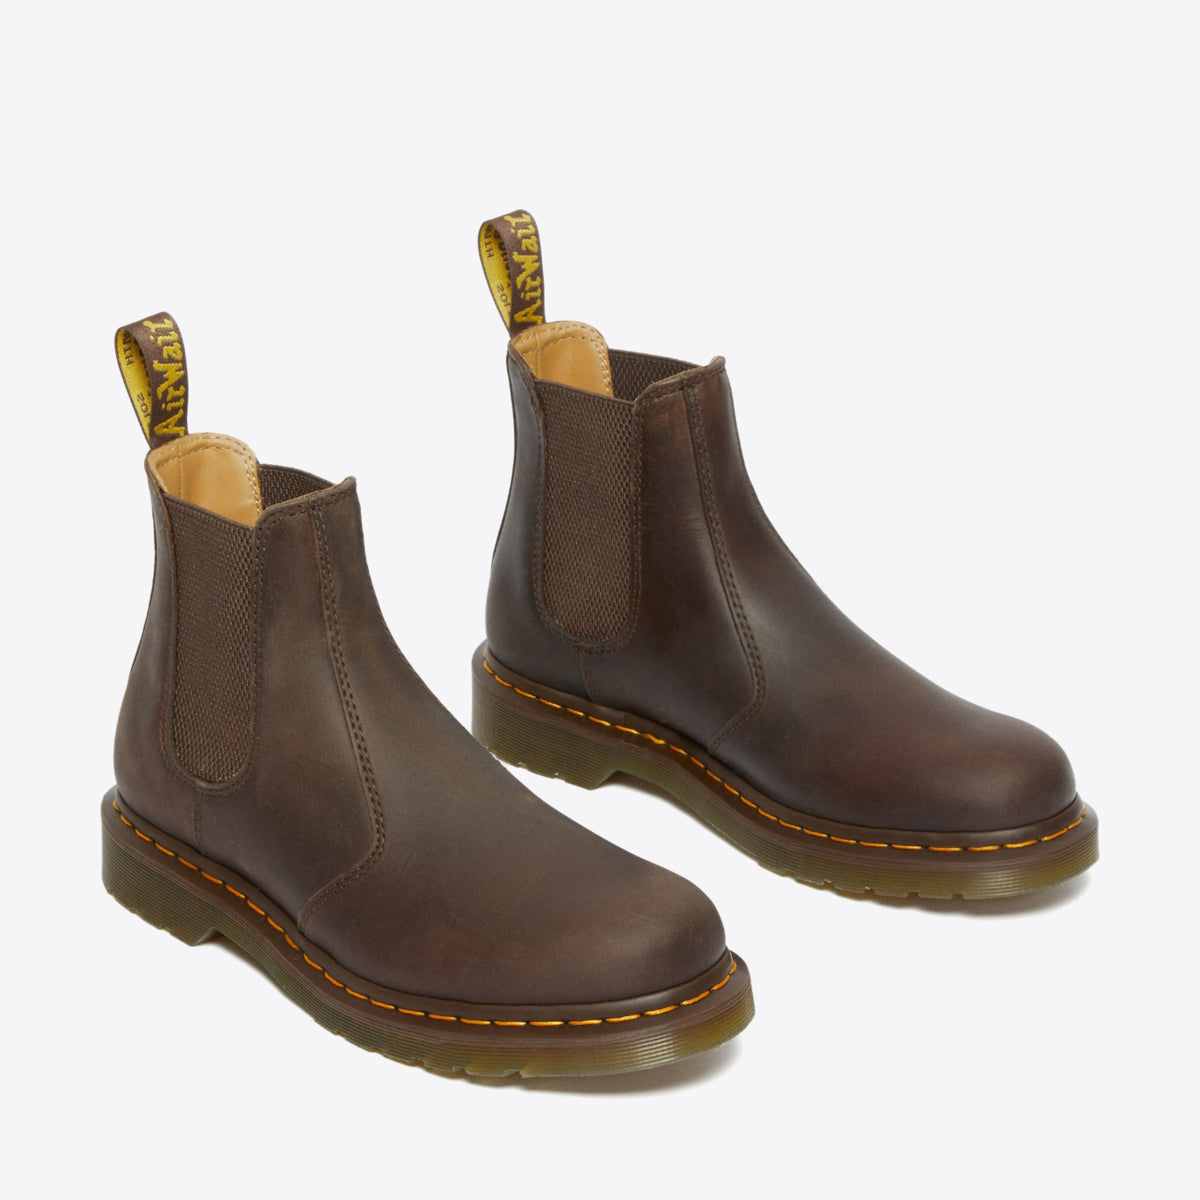 DR MARTENS 2976 Yellow Stitch Crazy Horse Chelsea Boot Dark Brown - Image 9